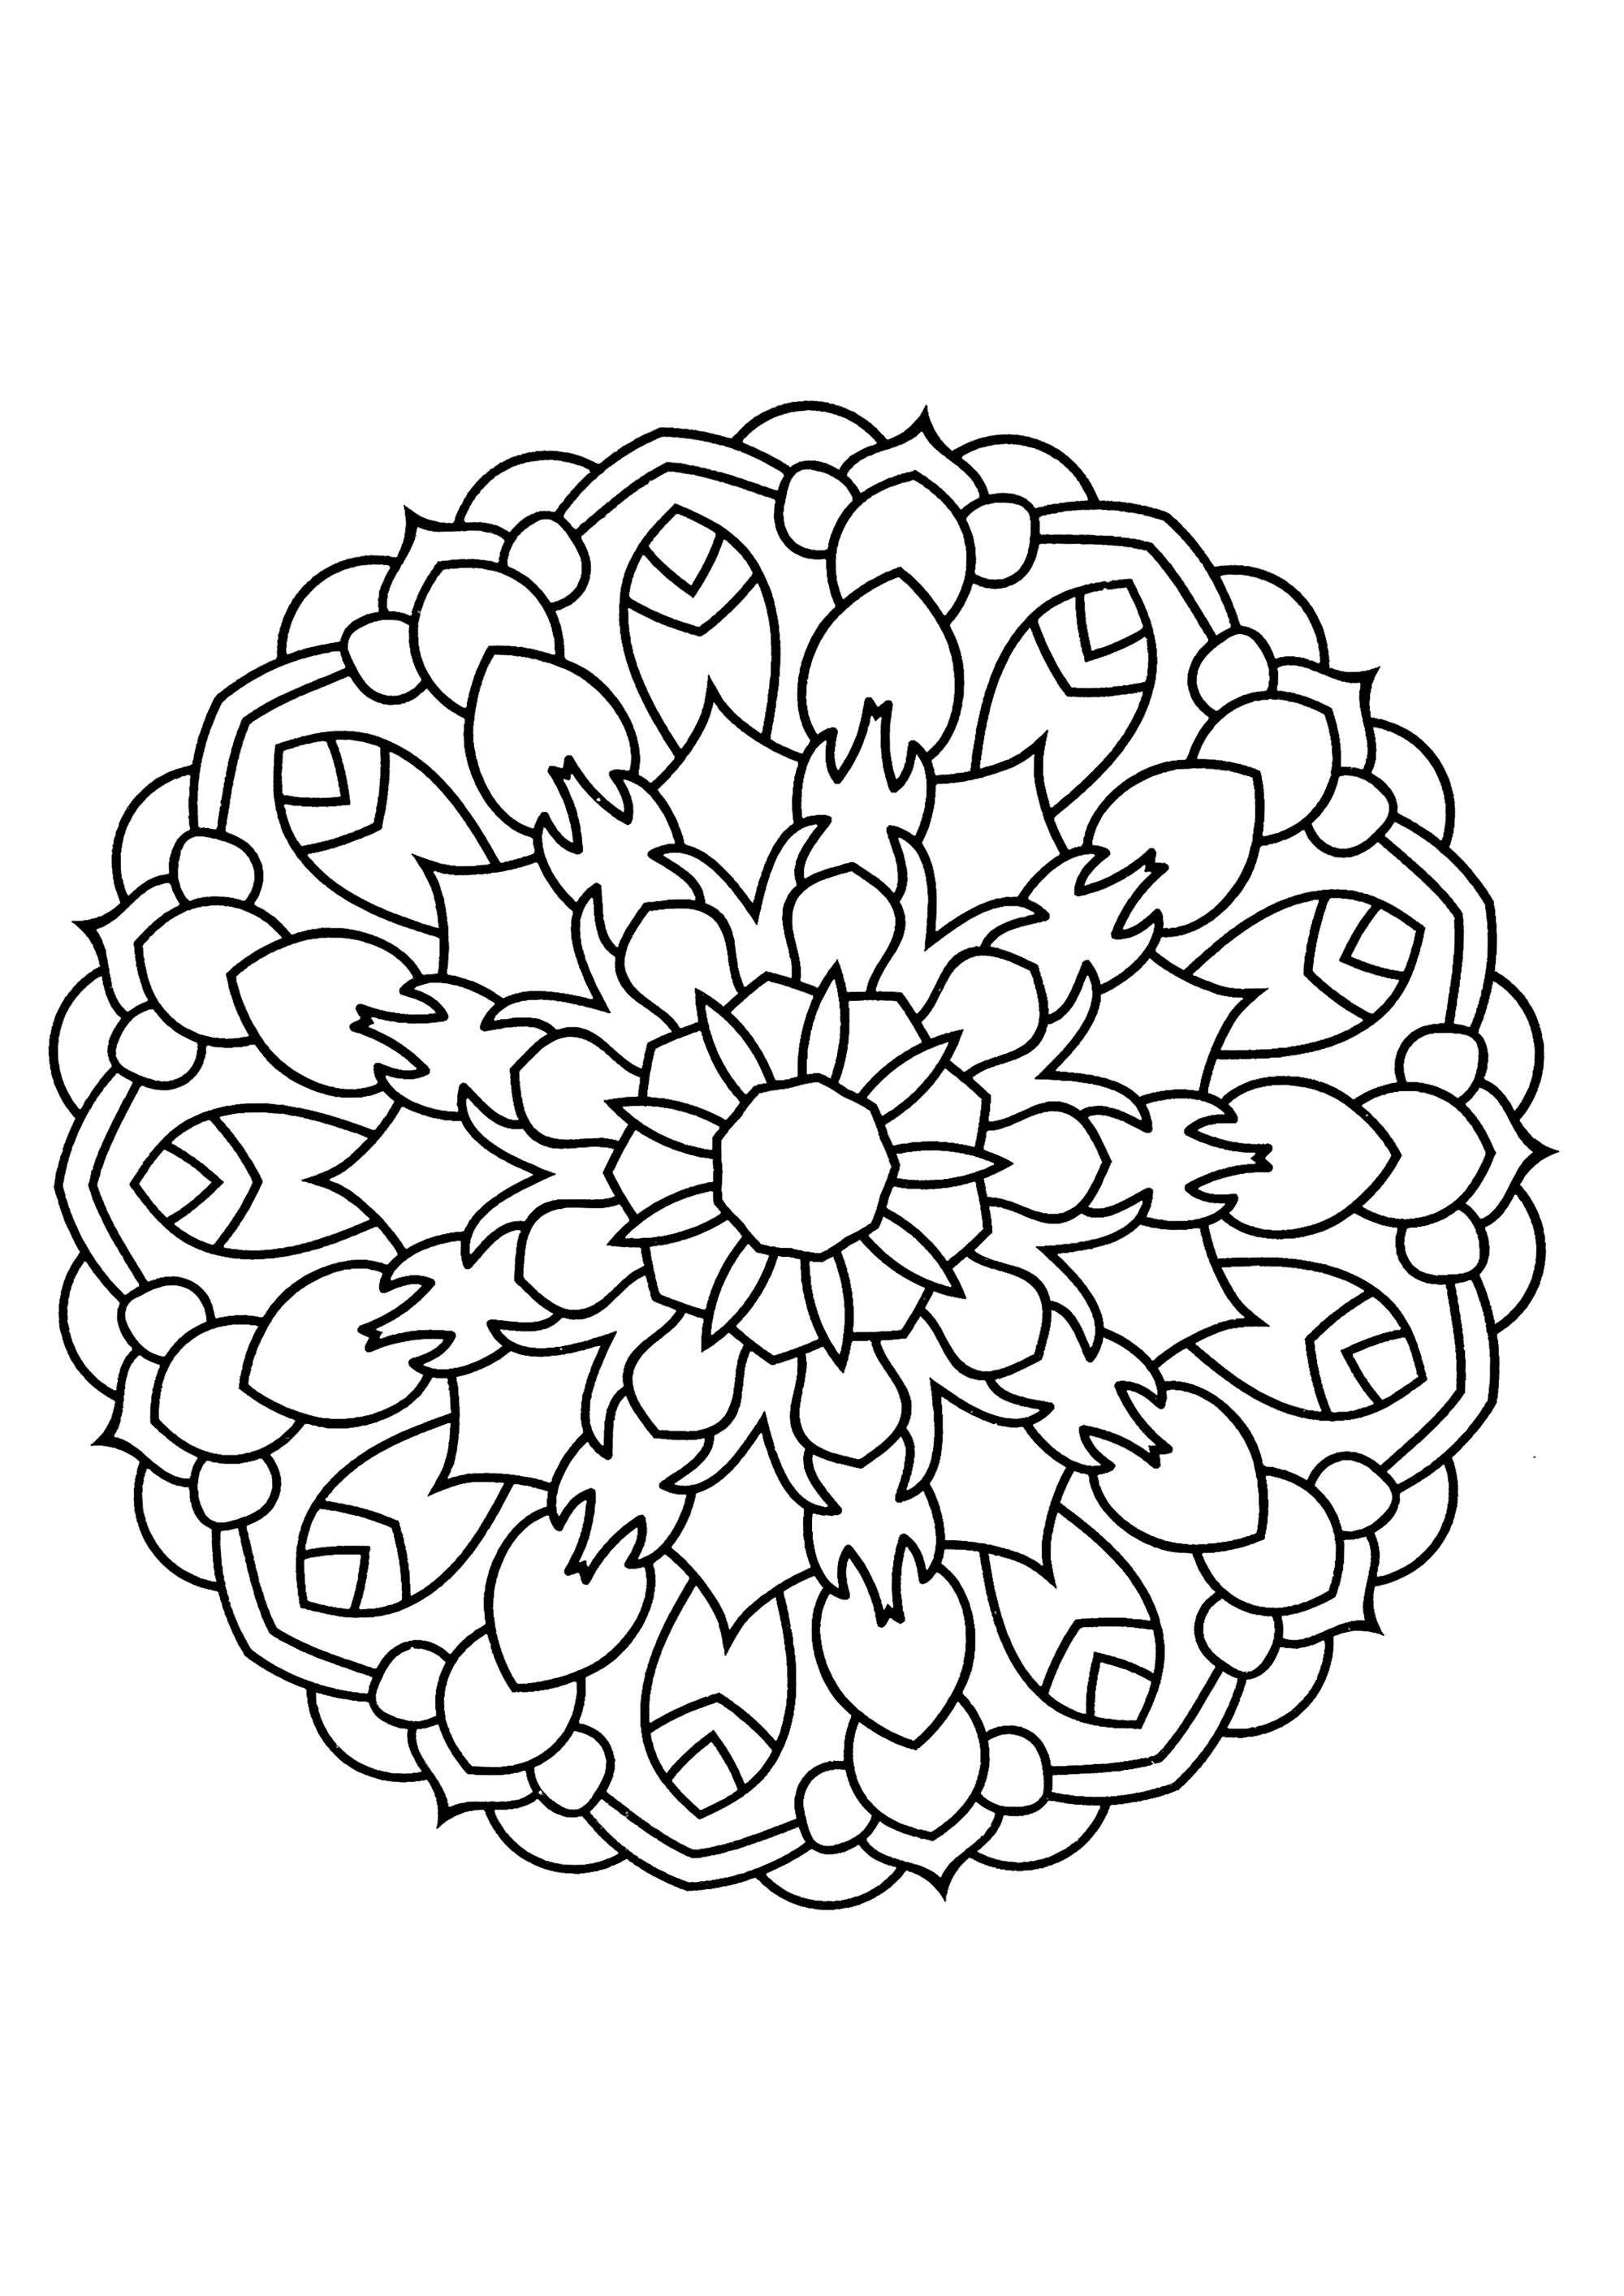 Mandala with thick lines - Mandalas Kids Coloring Pages